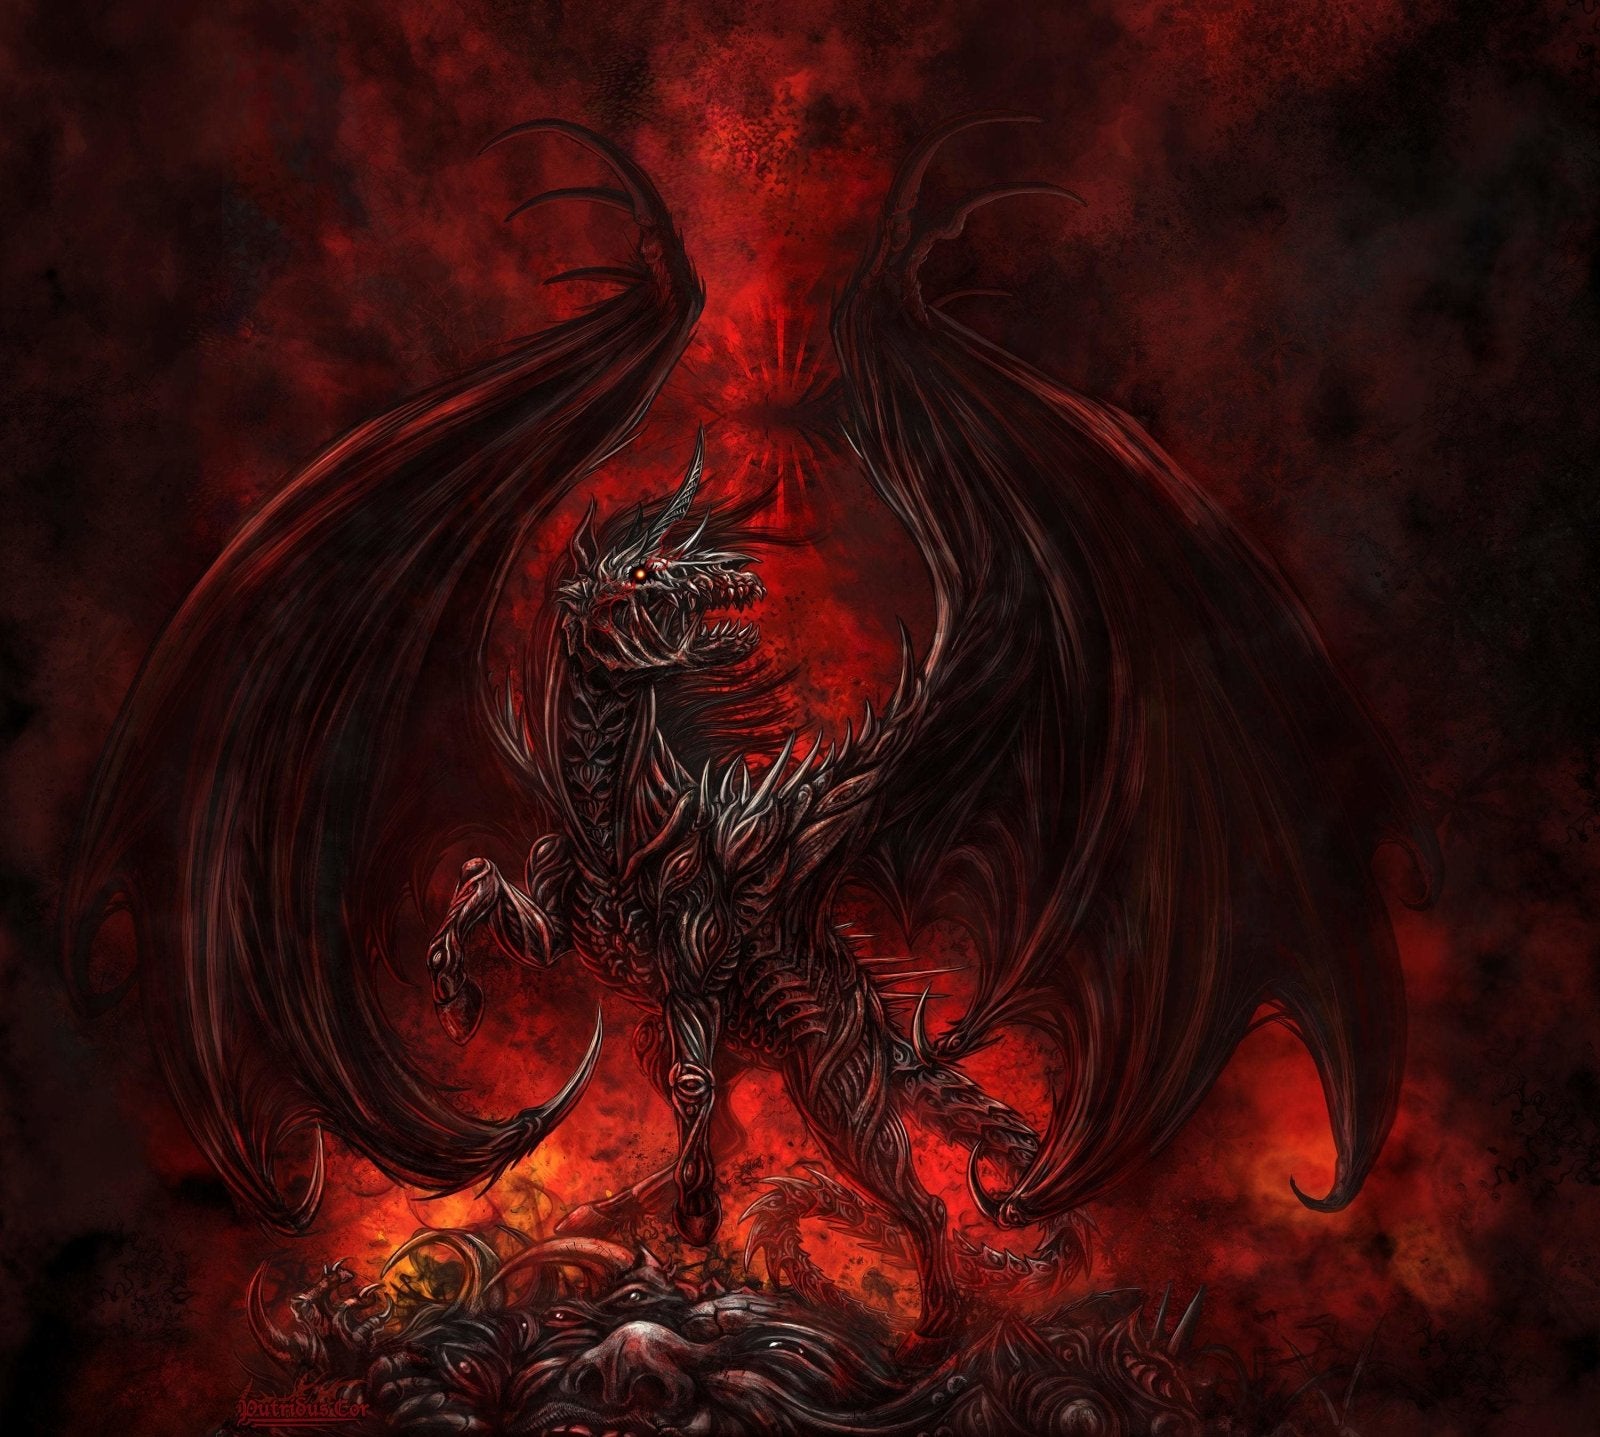 Custom Dark Fantasy Illustration for Book Covers and D&D campaigns. Commission your own Dragon, Demons or Monster Art